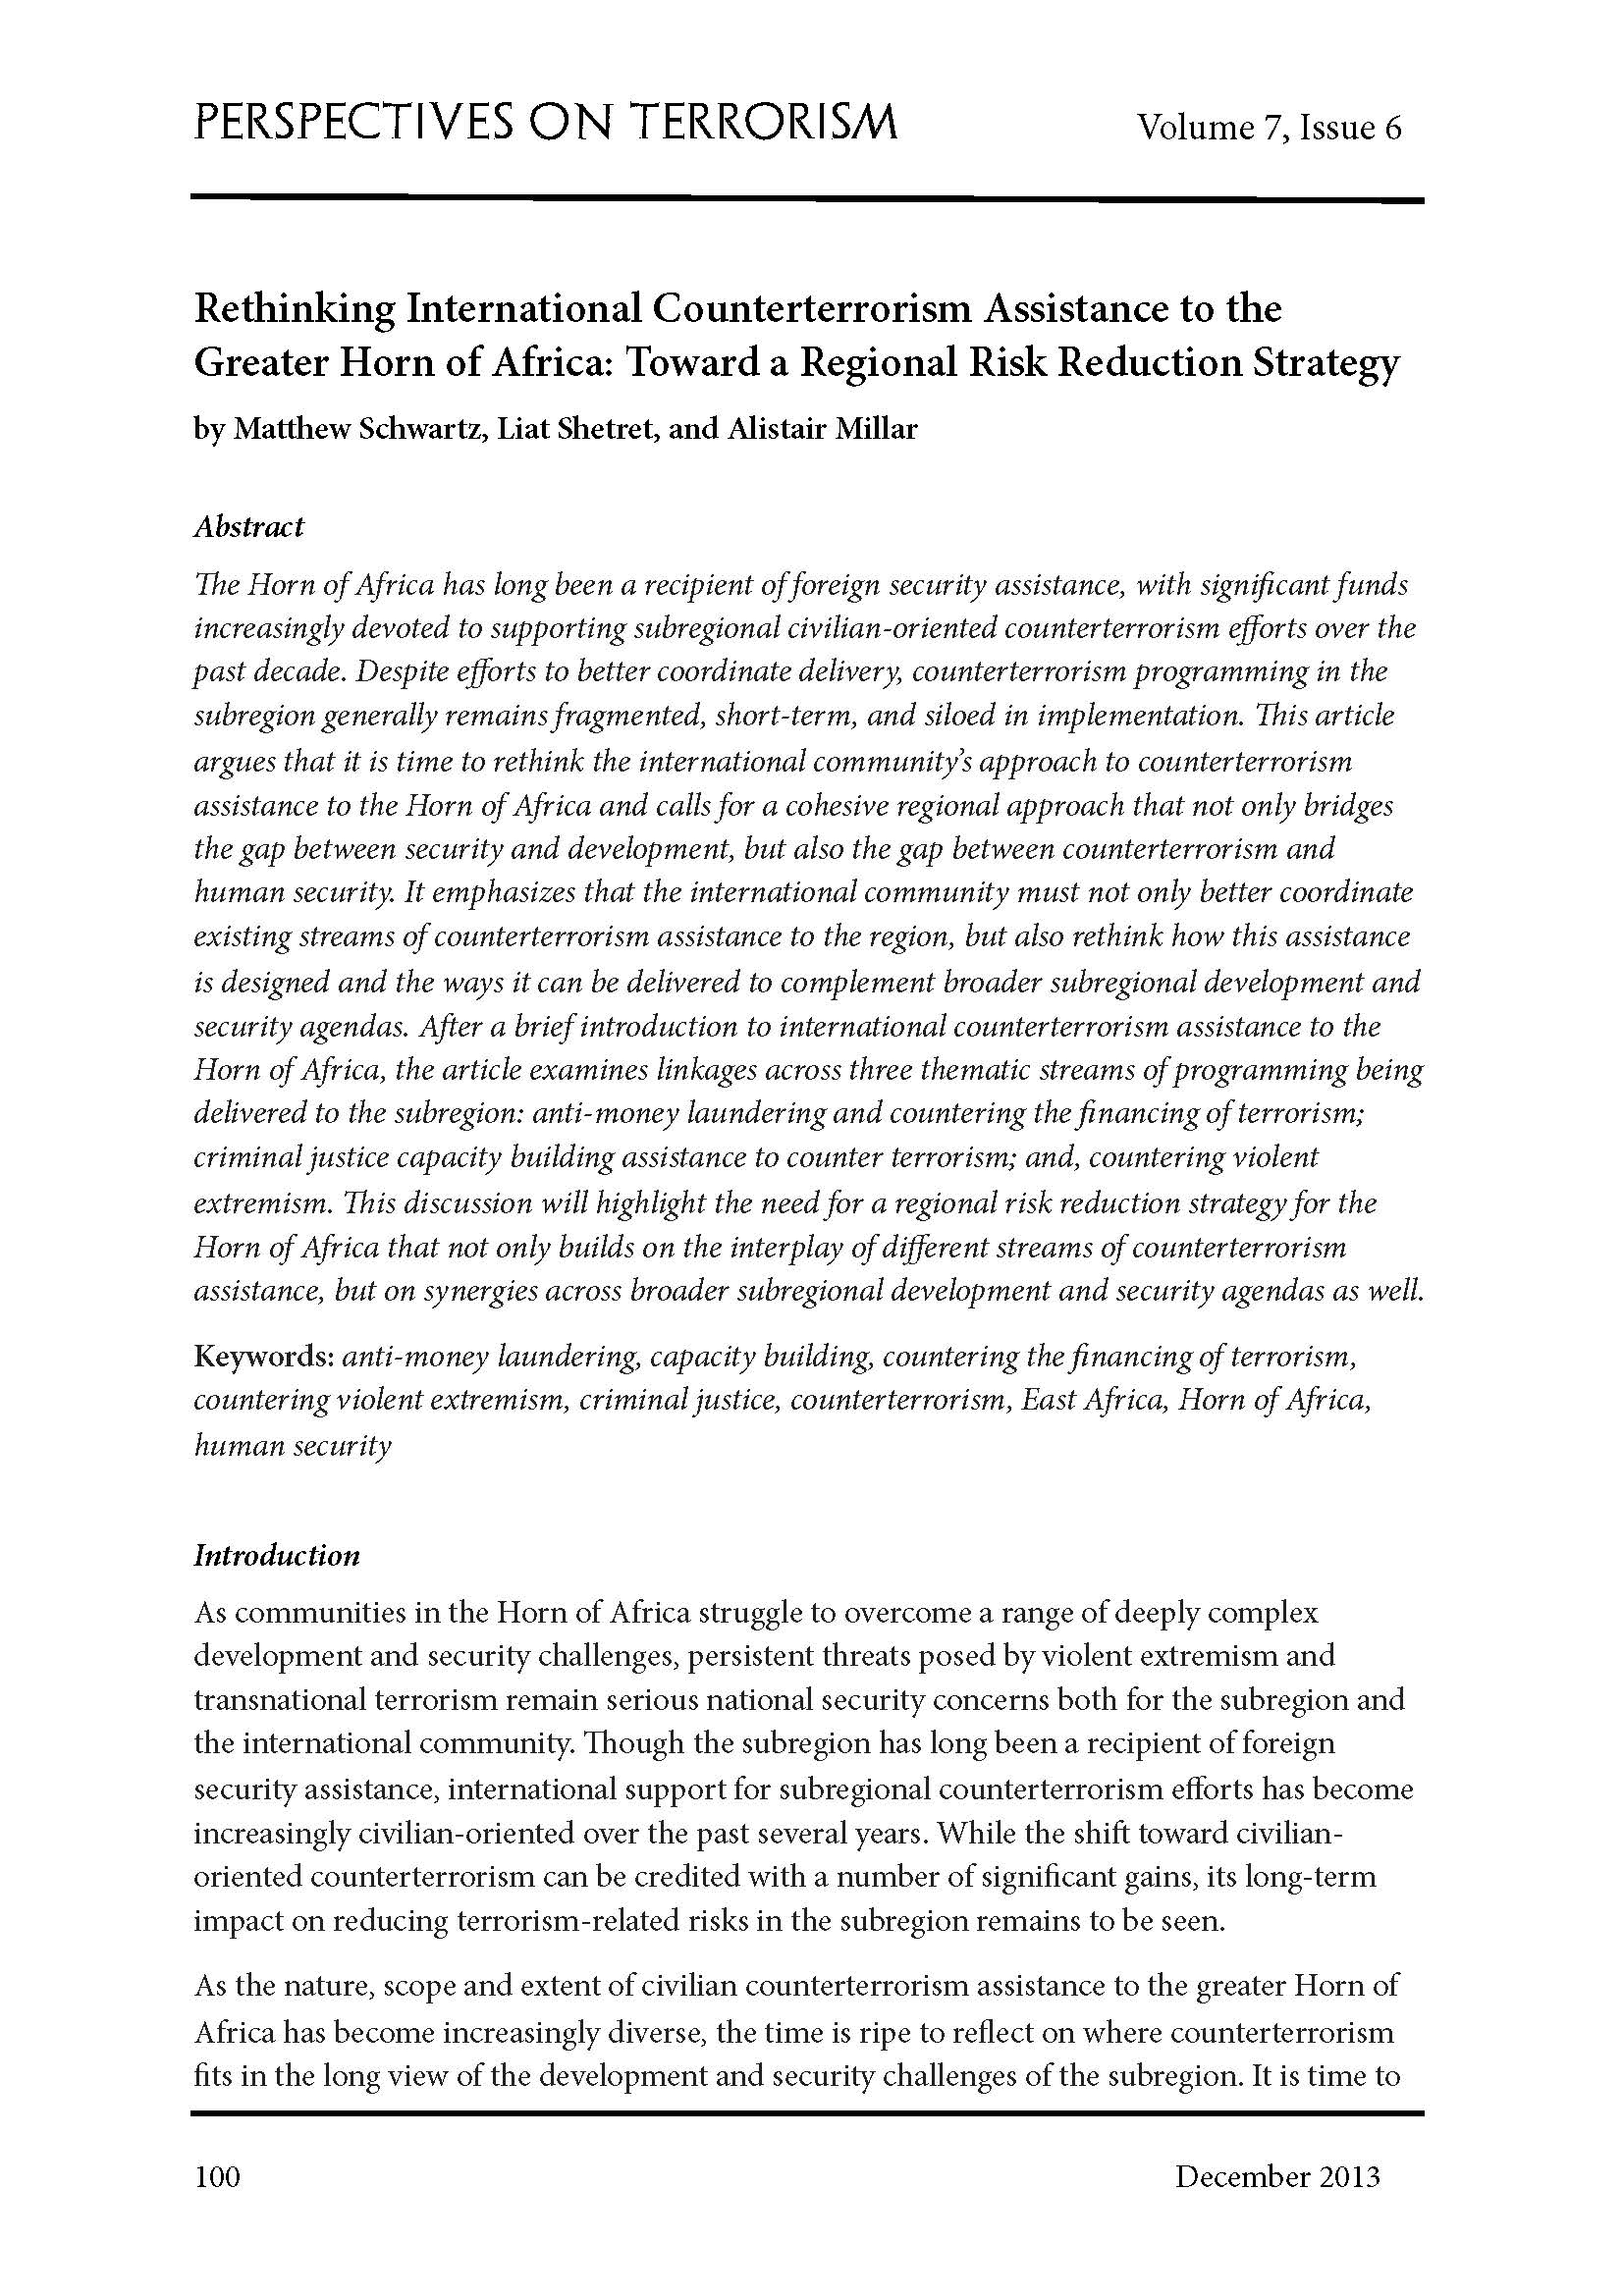 Rethinking International Counterterrorism Assistance to the Greater Horn of Africa: Toward a Regional Risk Reduction Strategy